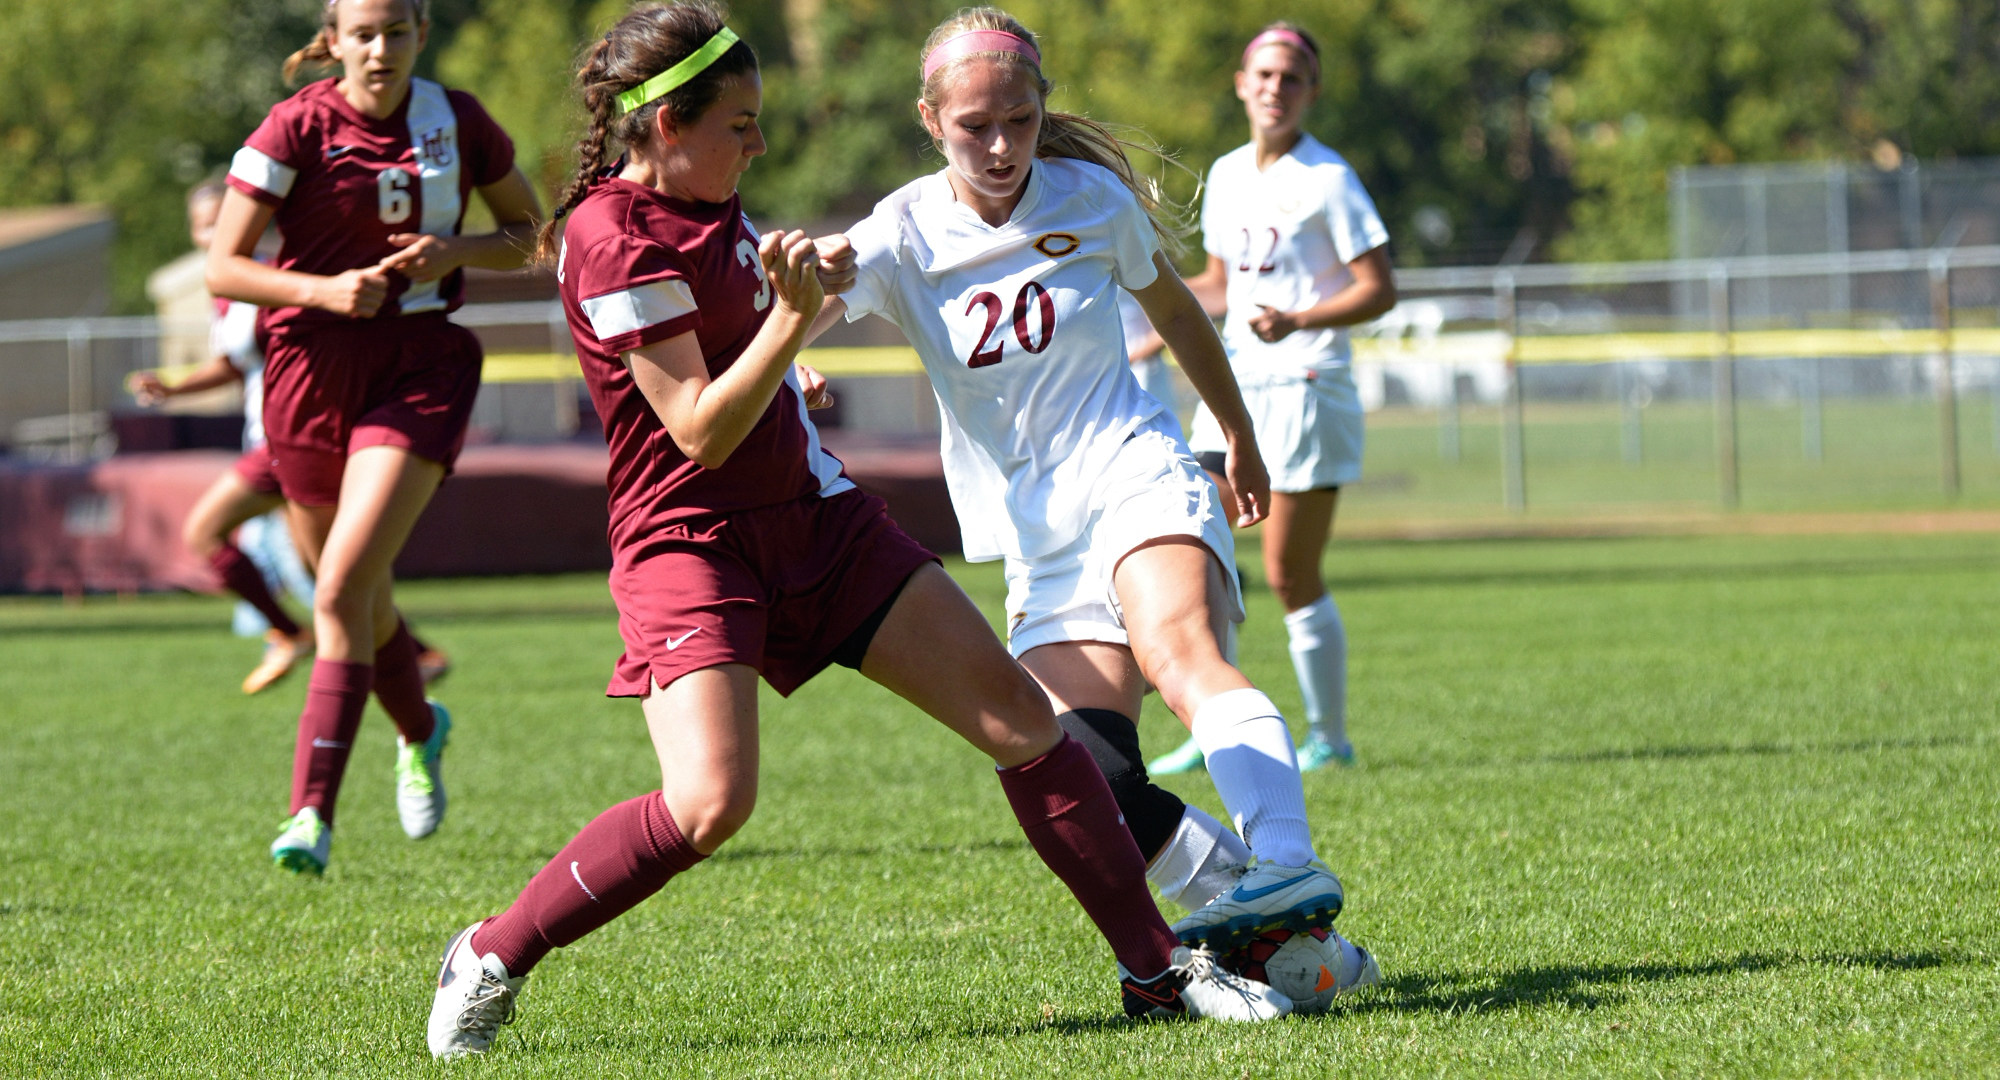 Senior Emily Wendorff had two goals,two assists and a game-high seven shots in the Cobbers' 4-0 win at Wis.-Superior.